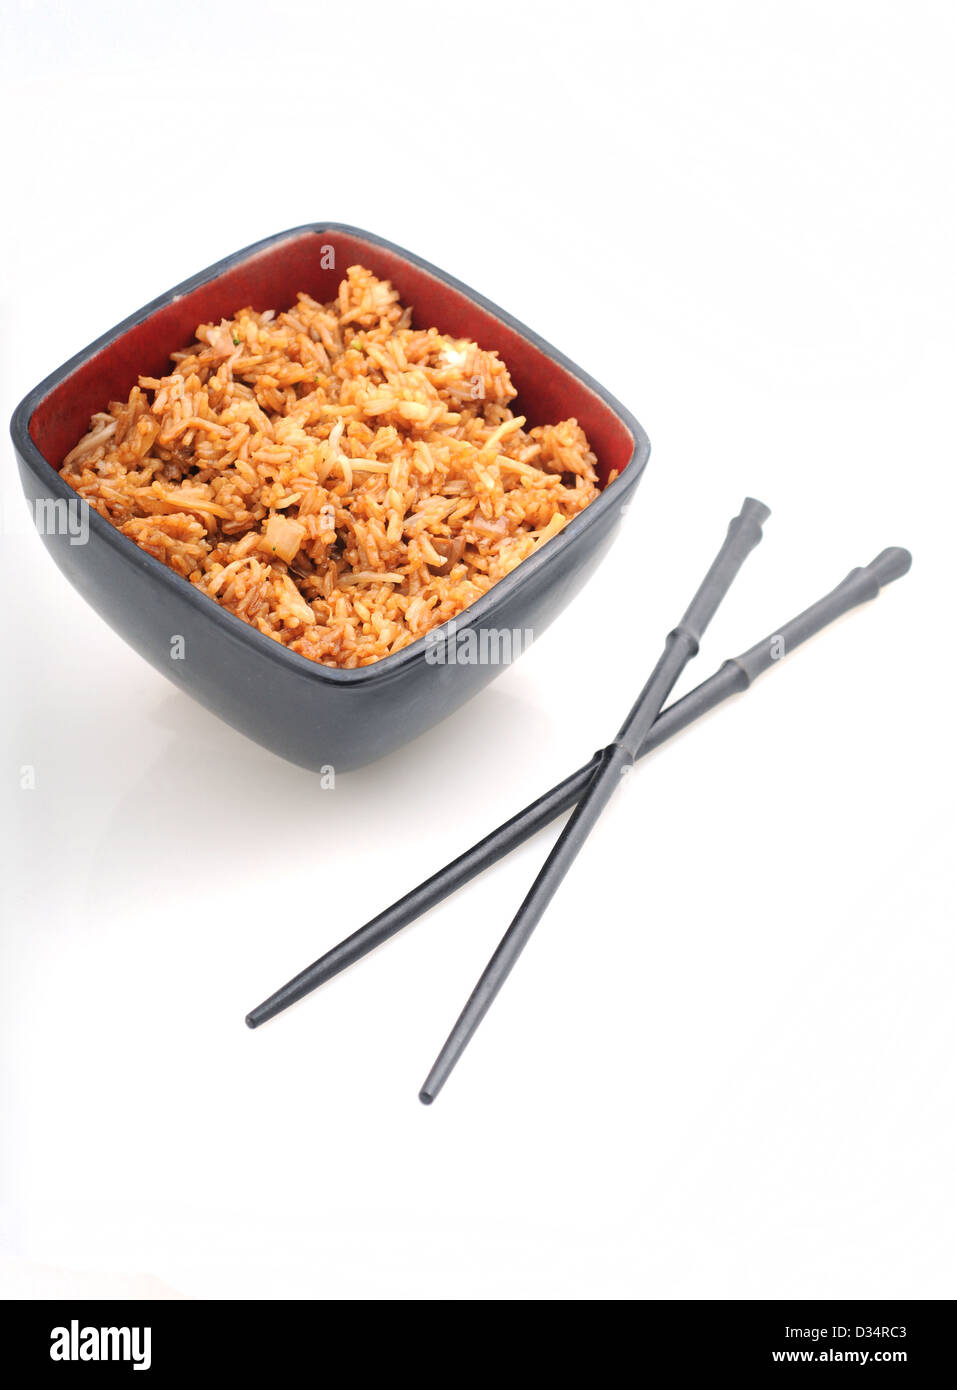 Chinese food or fried rice in red bowl with chopsticks Stock Photo